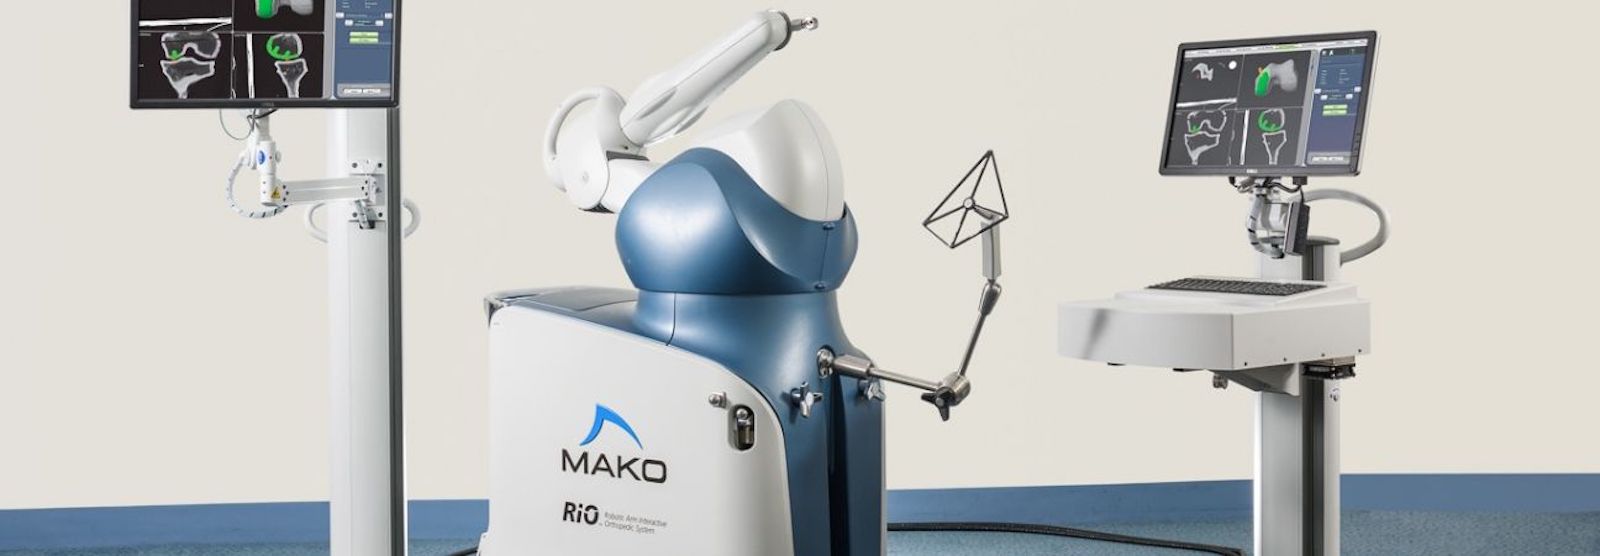 Mako Robotics System used for hip and knee surgery